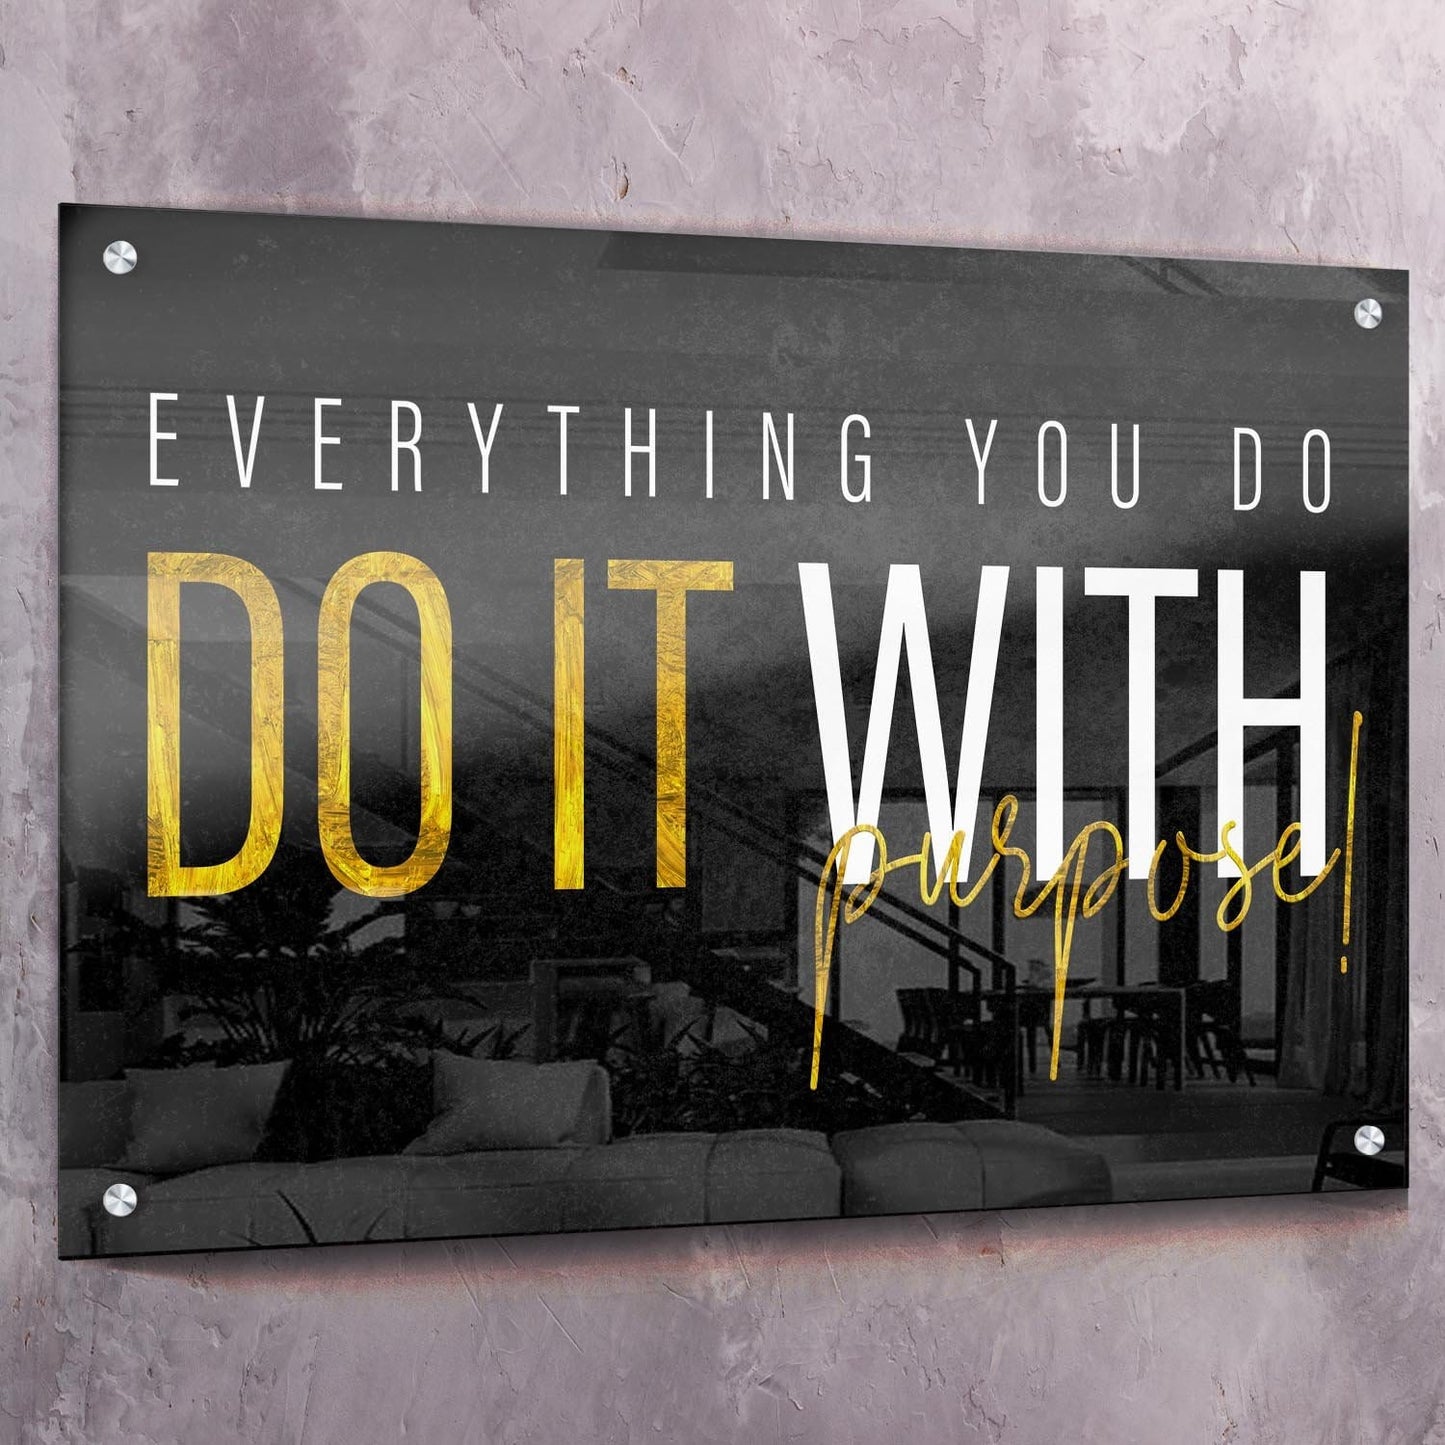 Do it with Purpose Wall Art | Inspirational Wall Art Motivational Wall Art Quotes Office Art | ImpaktMaker Exclusive Canvas Art Landscape